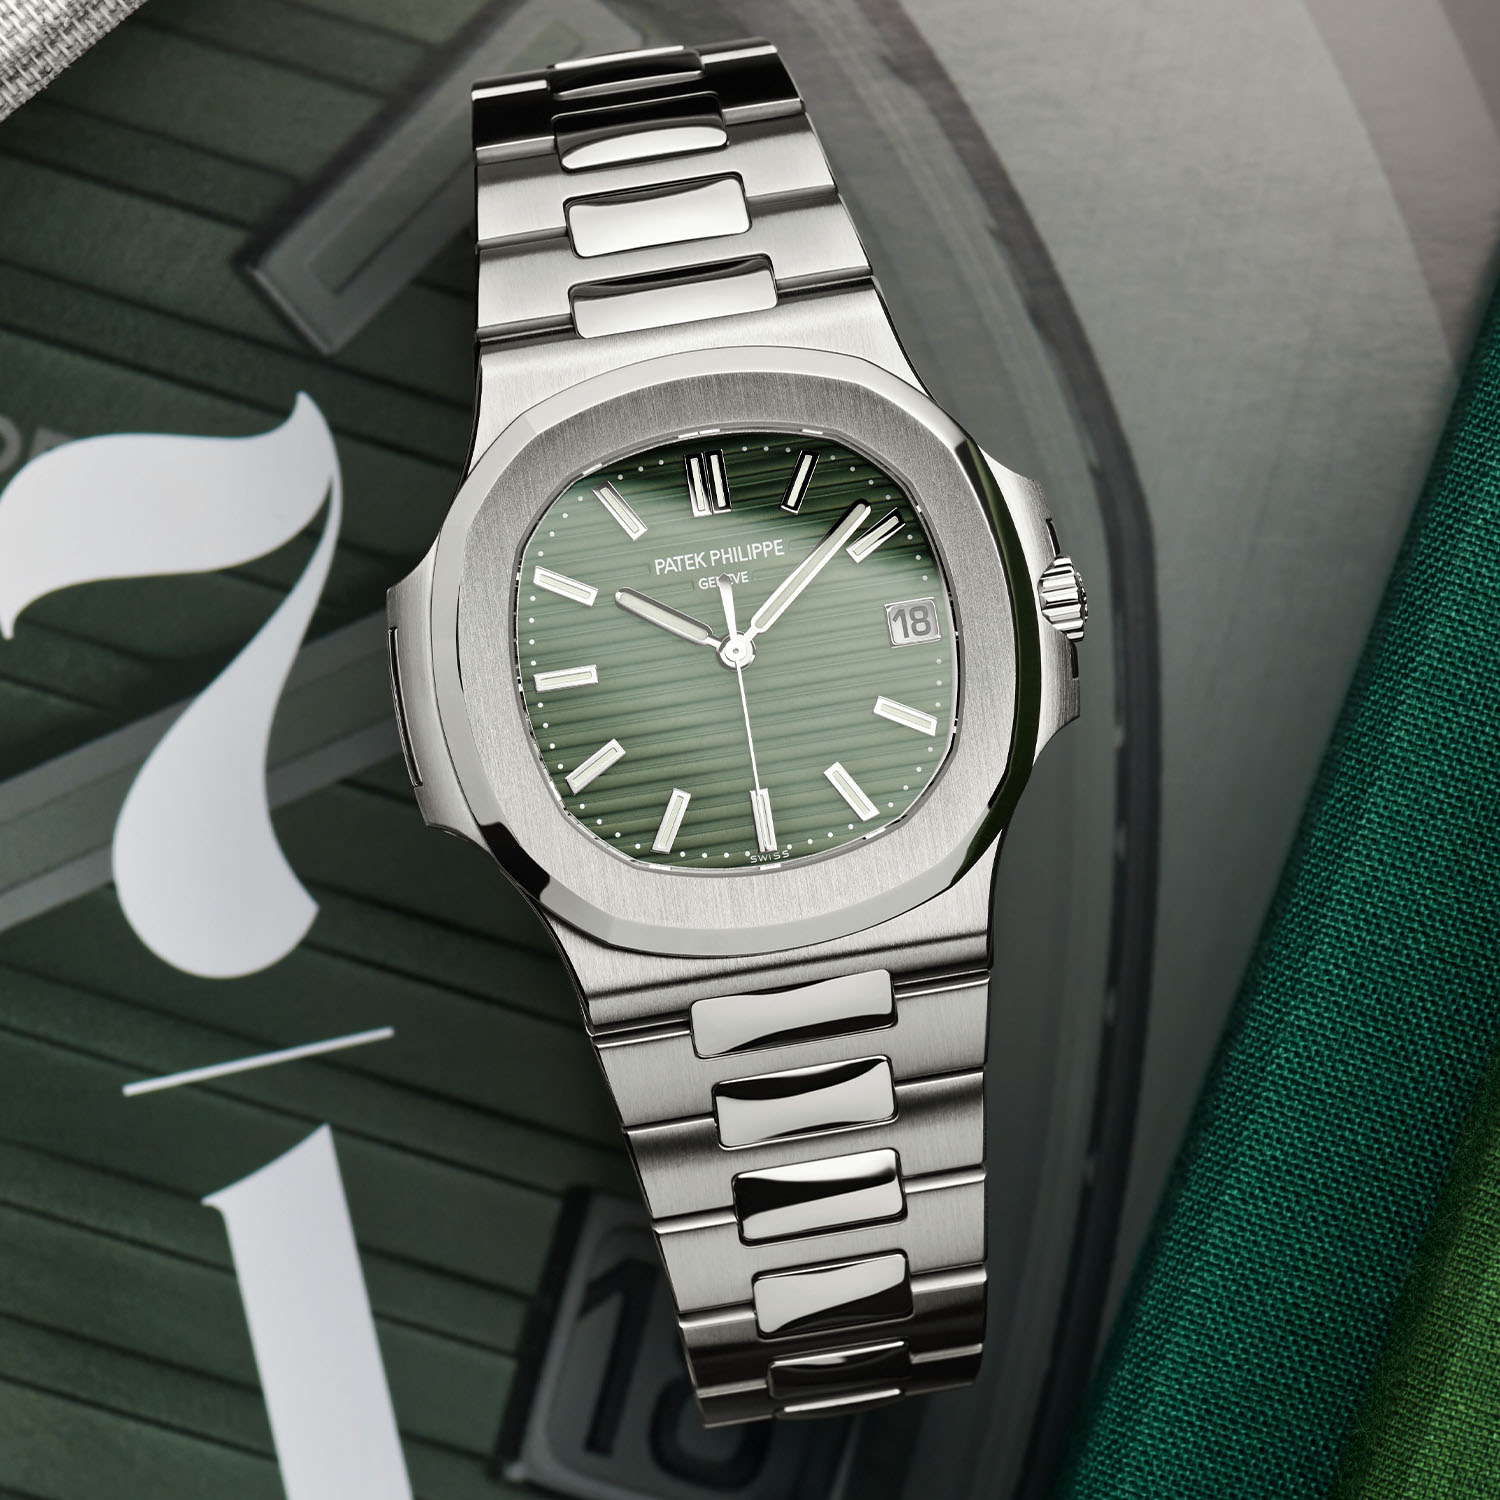 The new Nautilus 5711 Olive green, a watch with an expected short lifecycle